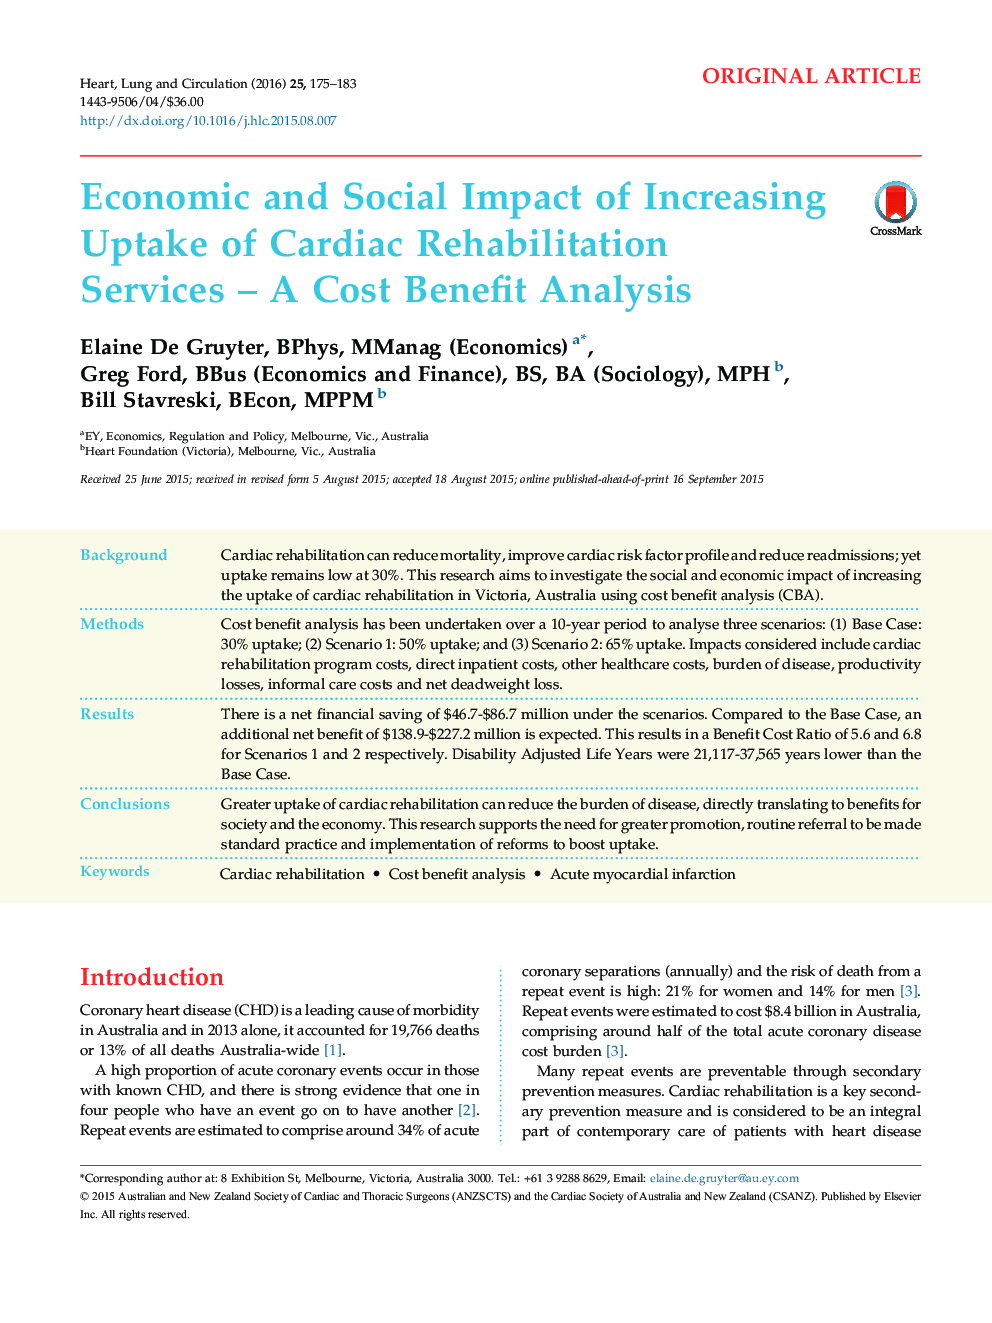 Economic and Social Impact of Increasing Uptake of Cardiac Rehabilitation Services – A Cost Benefit Analysis